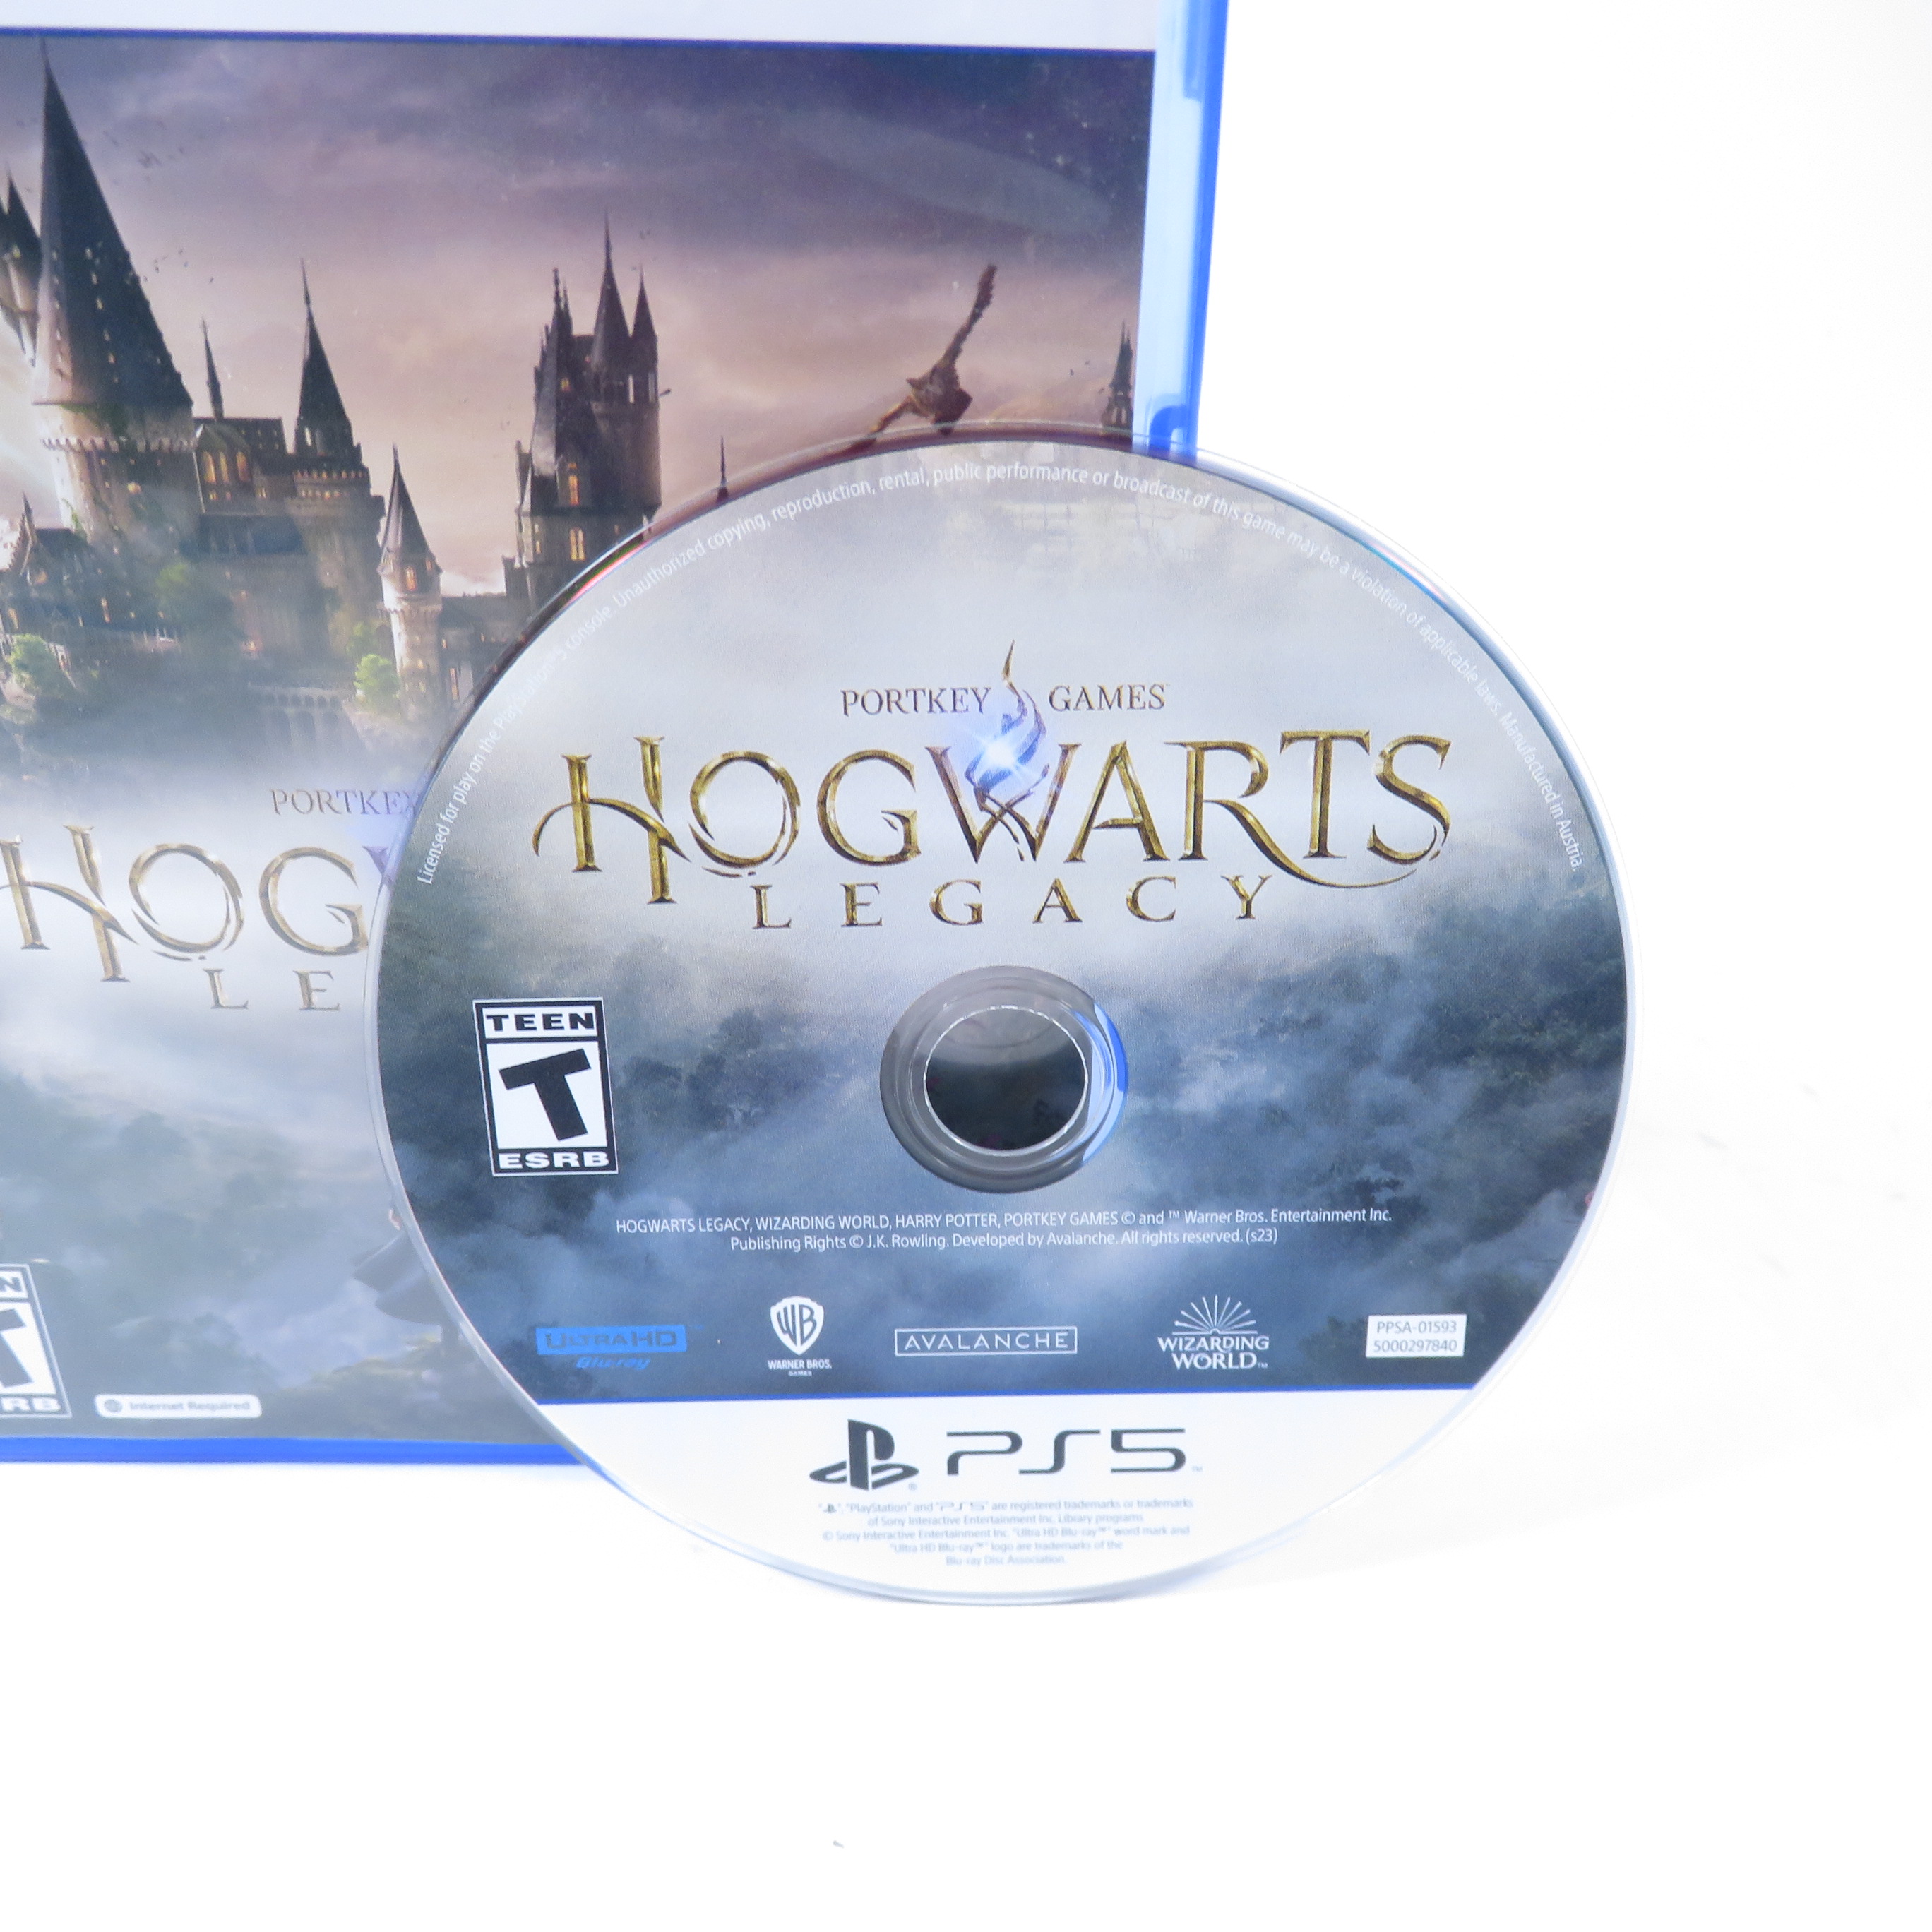 Video 5 Legacy the PlayStation Sony for Game Hogwarts